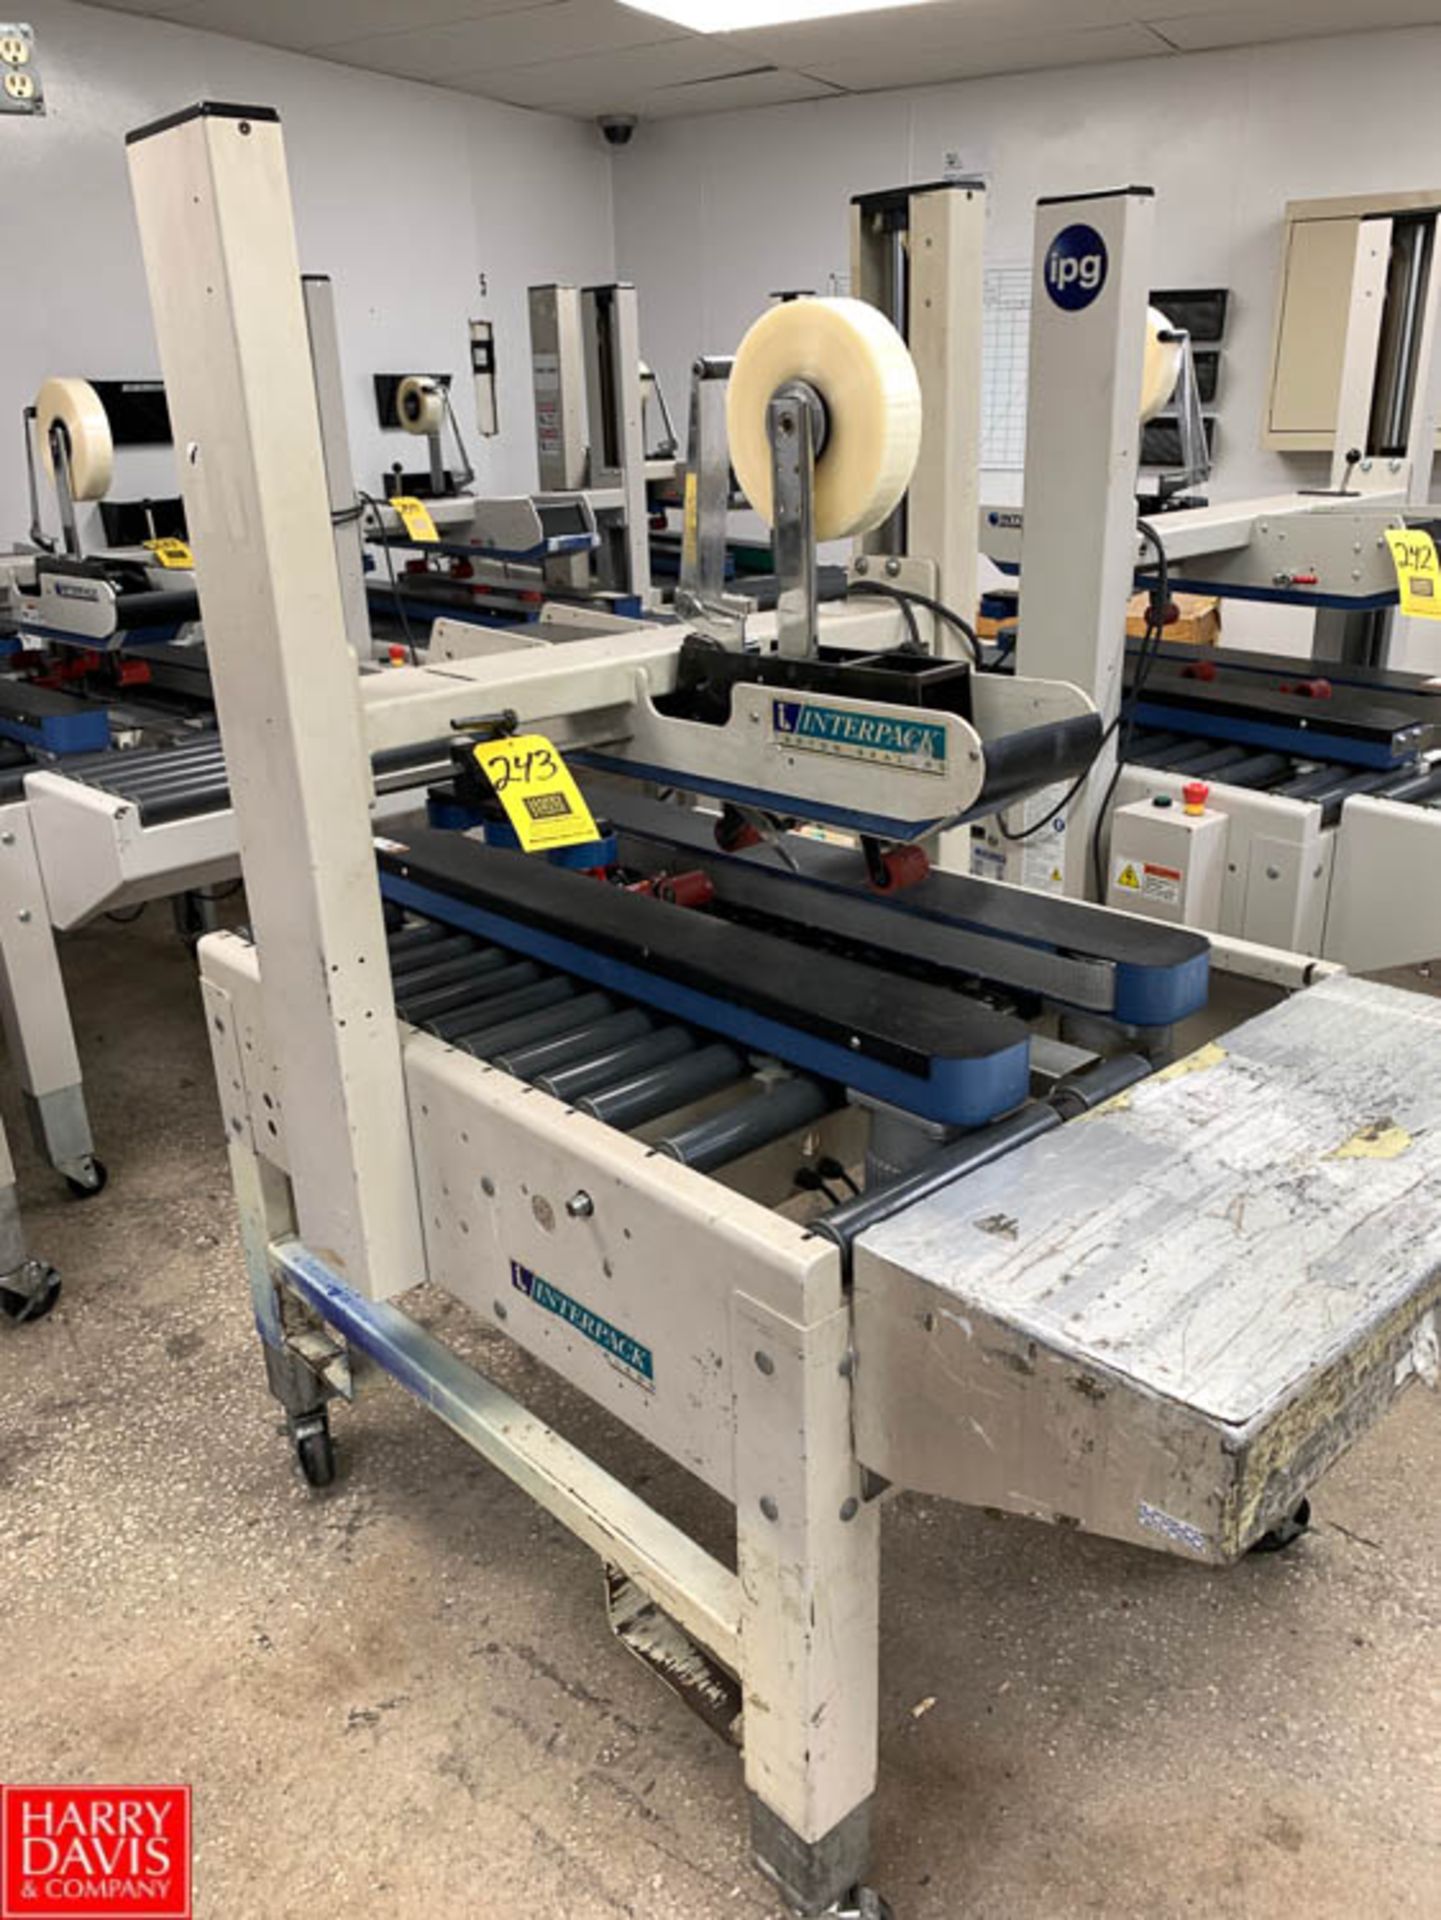 Interpack Top and Bottom Case Sealer, Model USA2024-SB Rigging Prices: 350